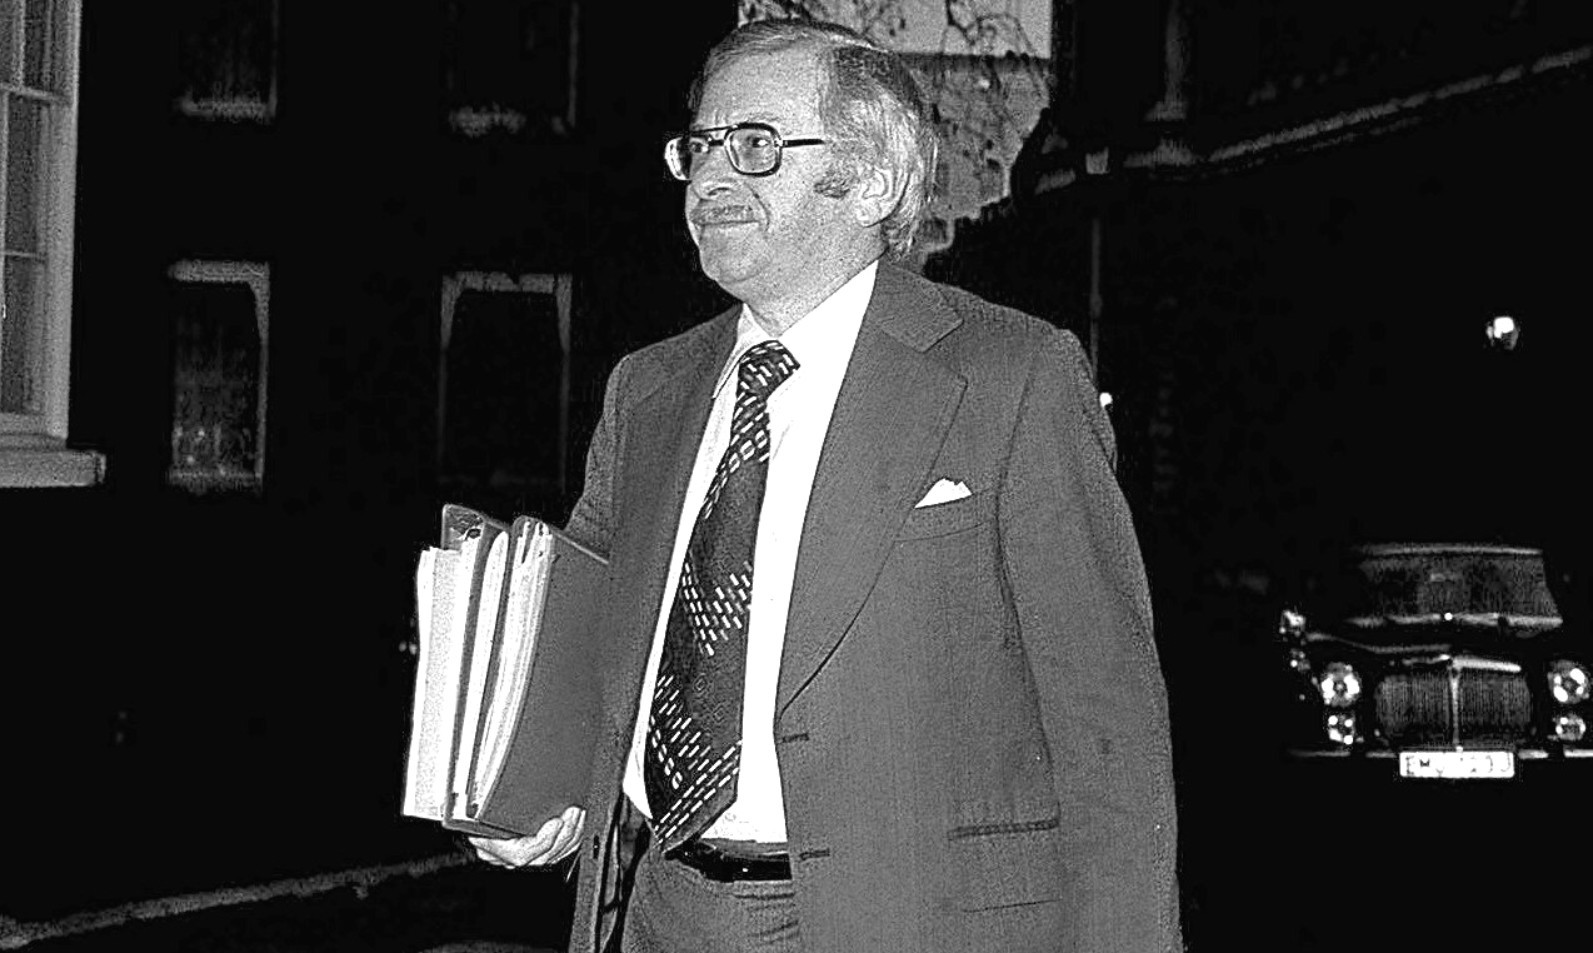 Joel Barnett, Chief Secretary to the Treasury, with an armful of files as he arrived at 10 Downing St where the Cabinet was meeting. *11/01/04: Lord Barnett, the man behind the Barnett Formula, which gives Scotland extra money for public services, who has blasted the policy as "embarrassing" to his name and unfair to the rest of the country. The Treasury Formula that puts an extra   1,000 per head on Scotland's spending power from the public purse was introduced in 1978. Lord Barnett, who also wrote about the formula in 1982, told Scotland on Sunday newspaper that it was out-dated.